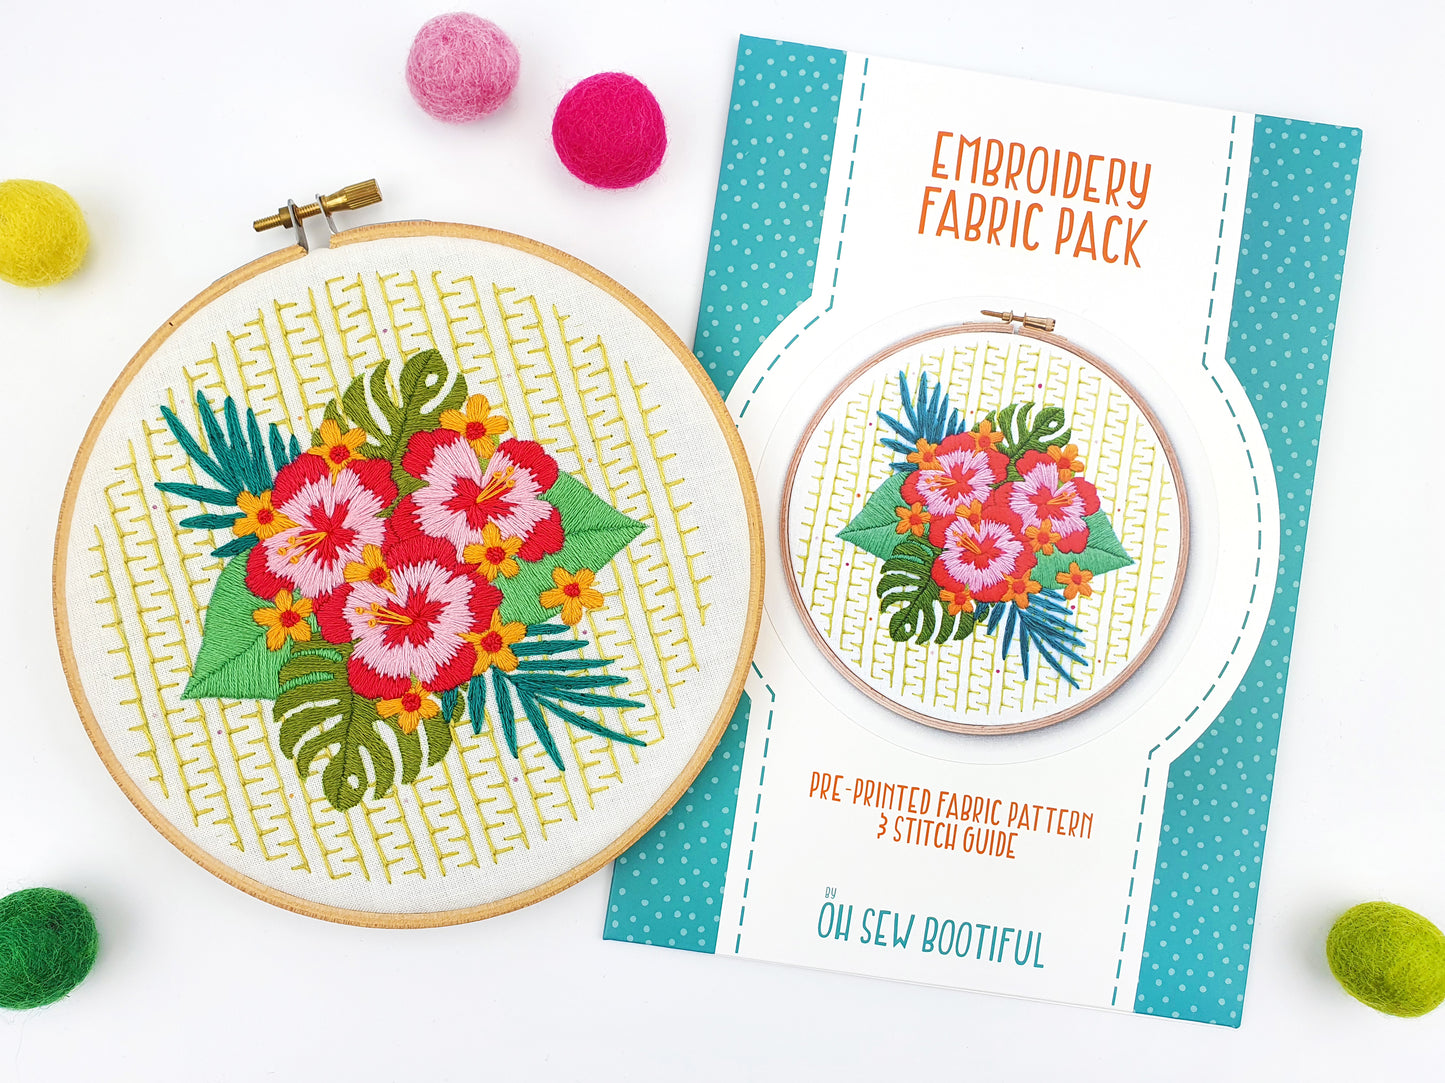 Hibiscus Embroidery Pattern, Summer Embroidery Project, Pattern Printed on Fabric - Fabric Packs - ohsewbootiful